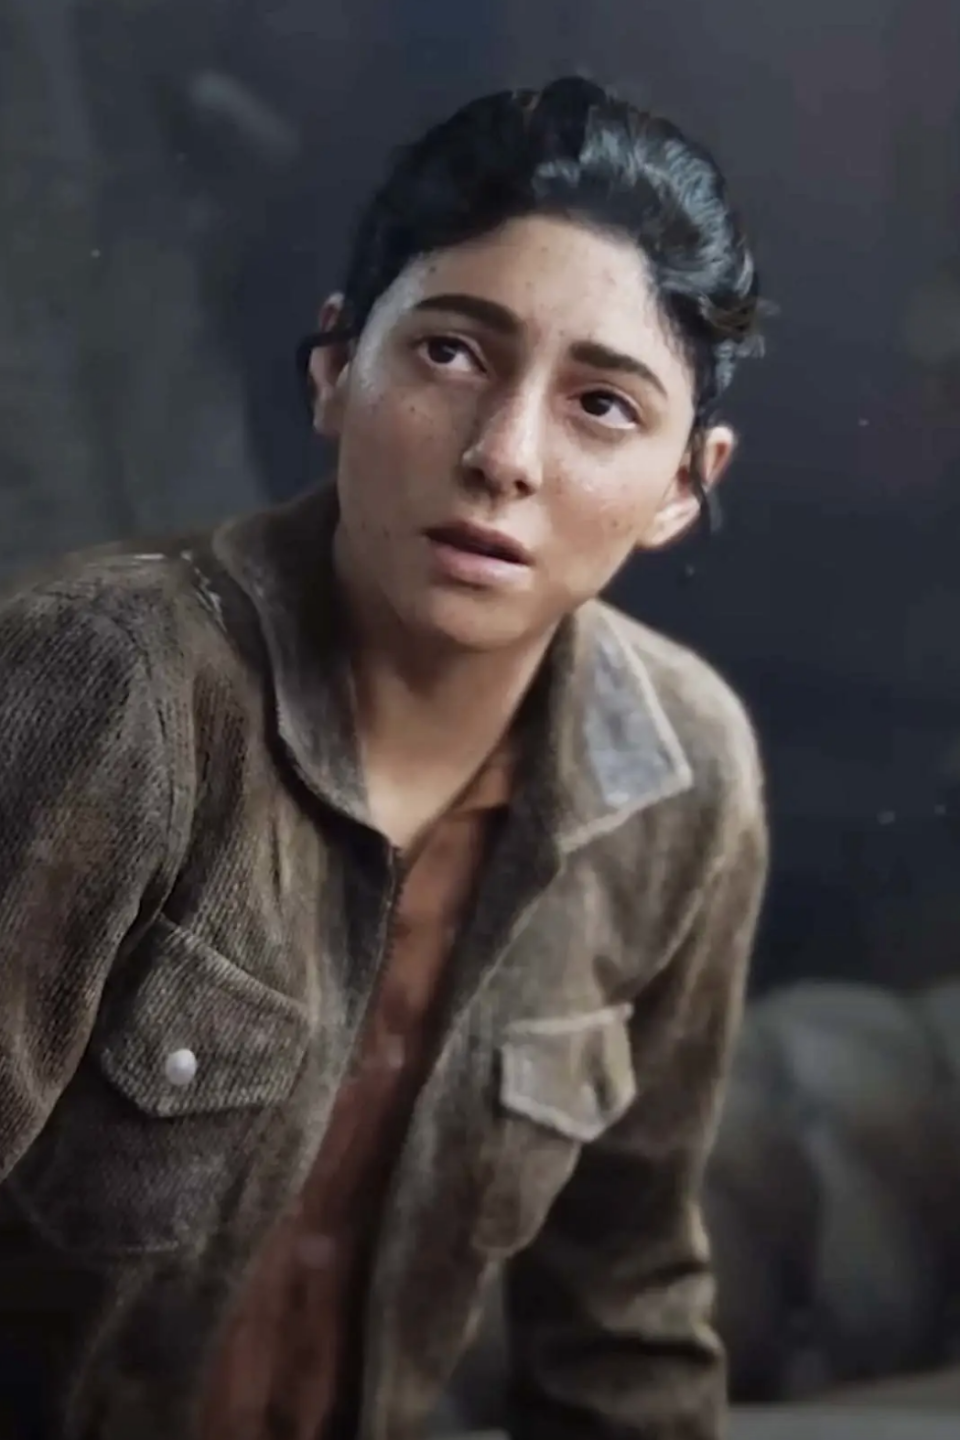 Character from The Last of Us video game, in a distressed state, wearing a brown jacket